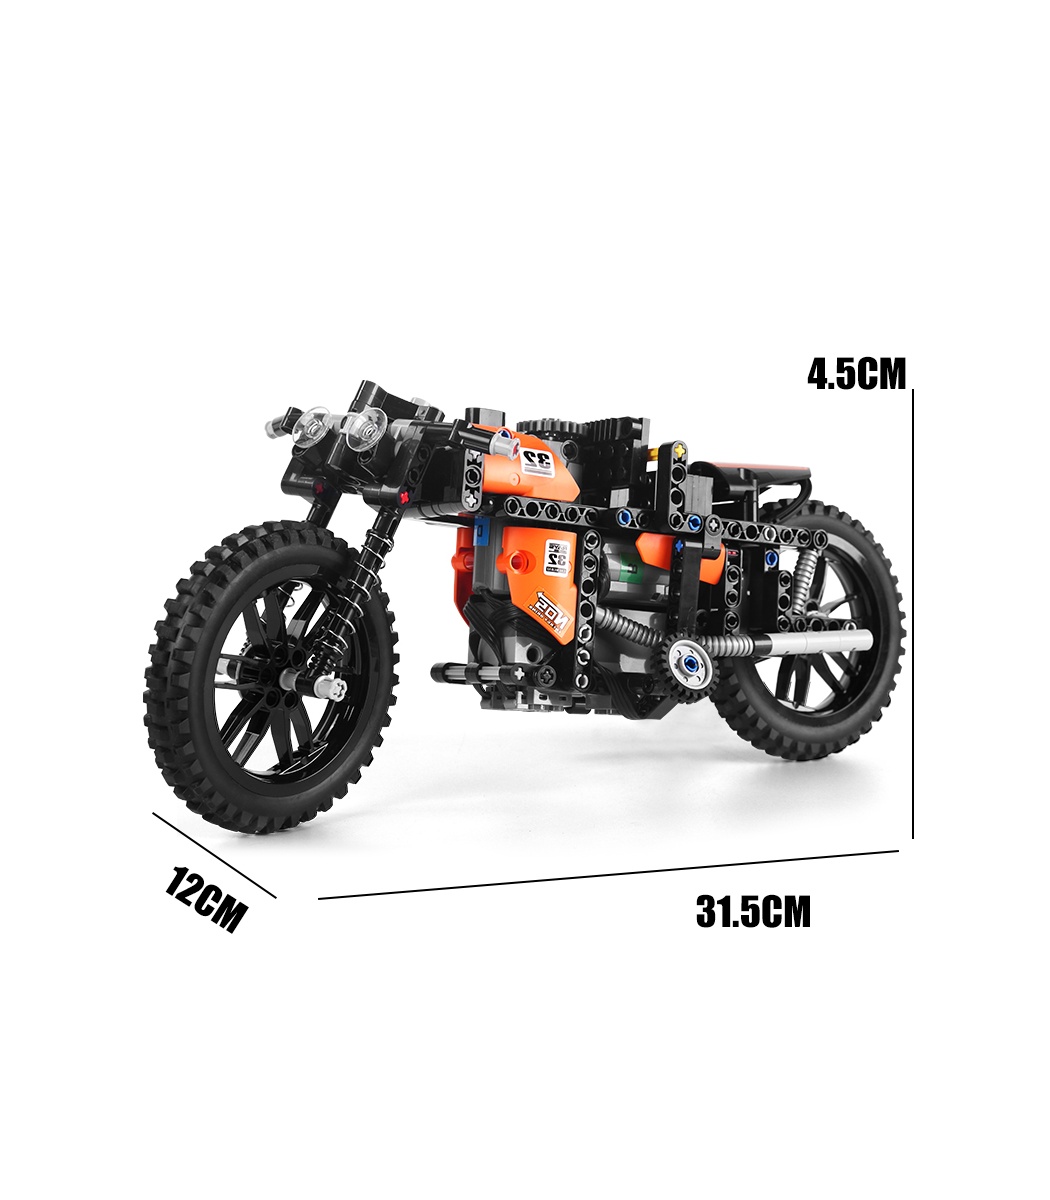 MOLD KING 23005 Racing Motorcycle Remote Control Building Blocks Toy Set 